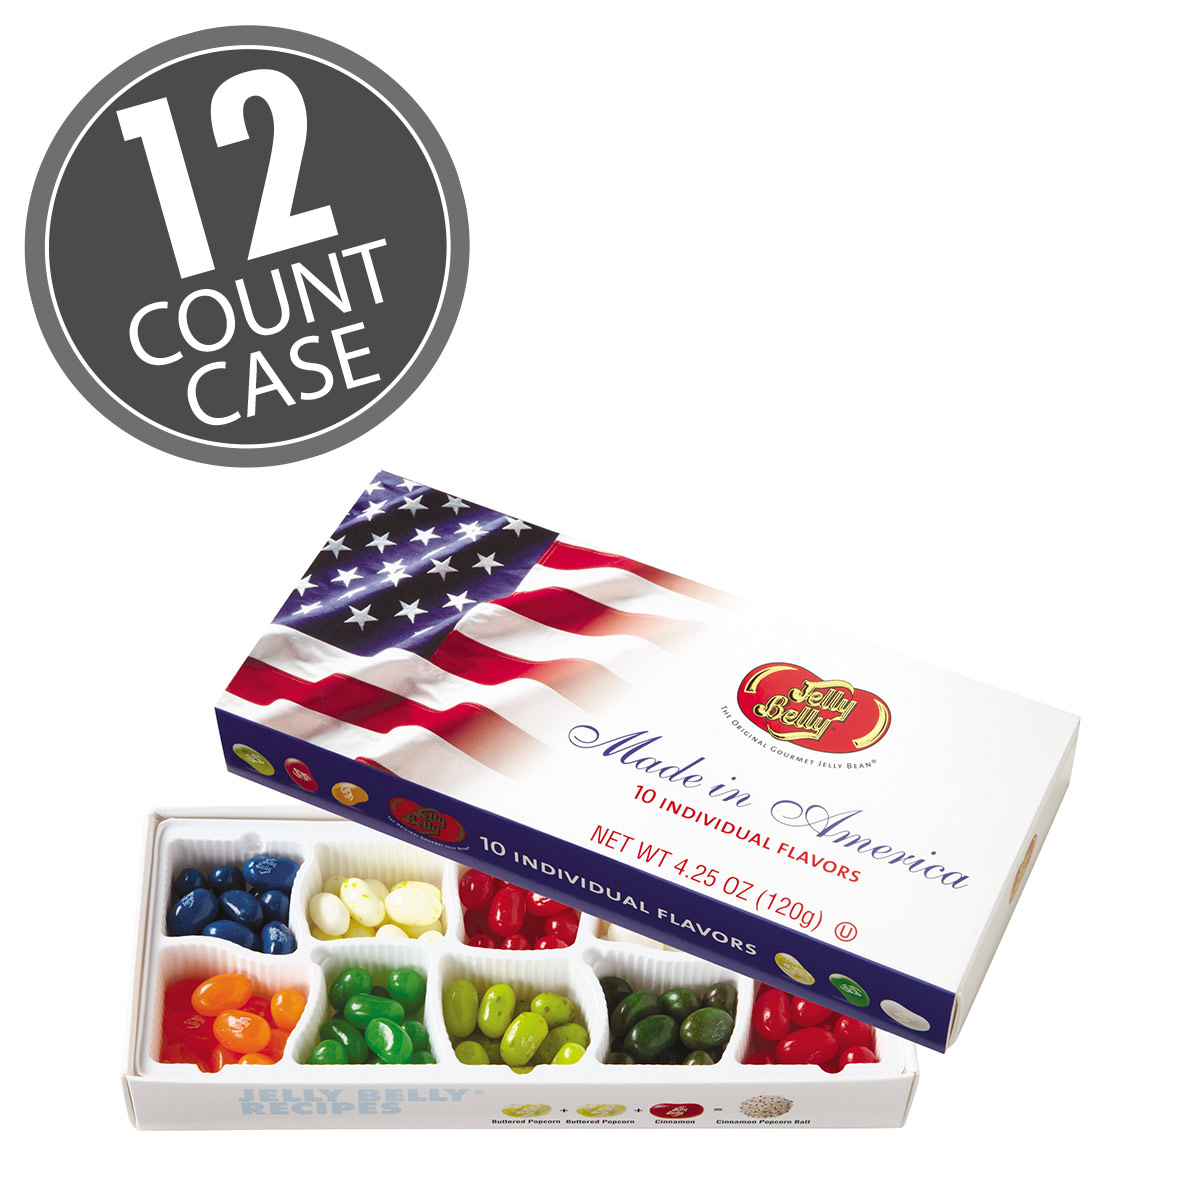 10-Flavor Patriotic Gift Box from Jelly Belly. Ten assorted flavors of jelly beans with US flag box. Great 4th of July candy!